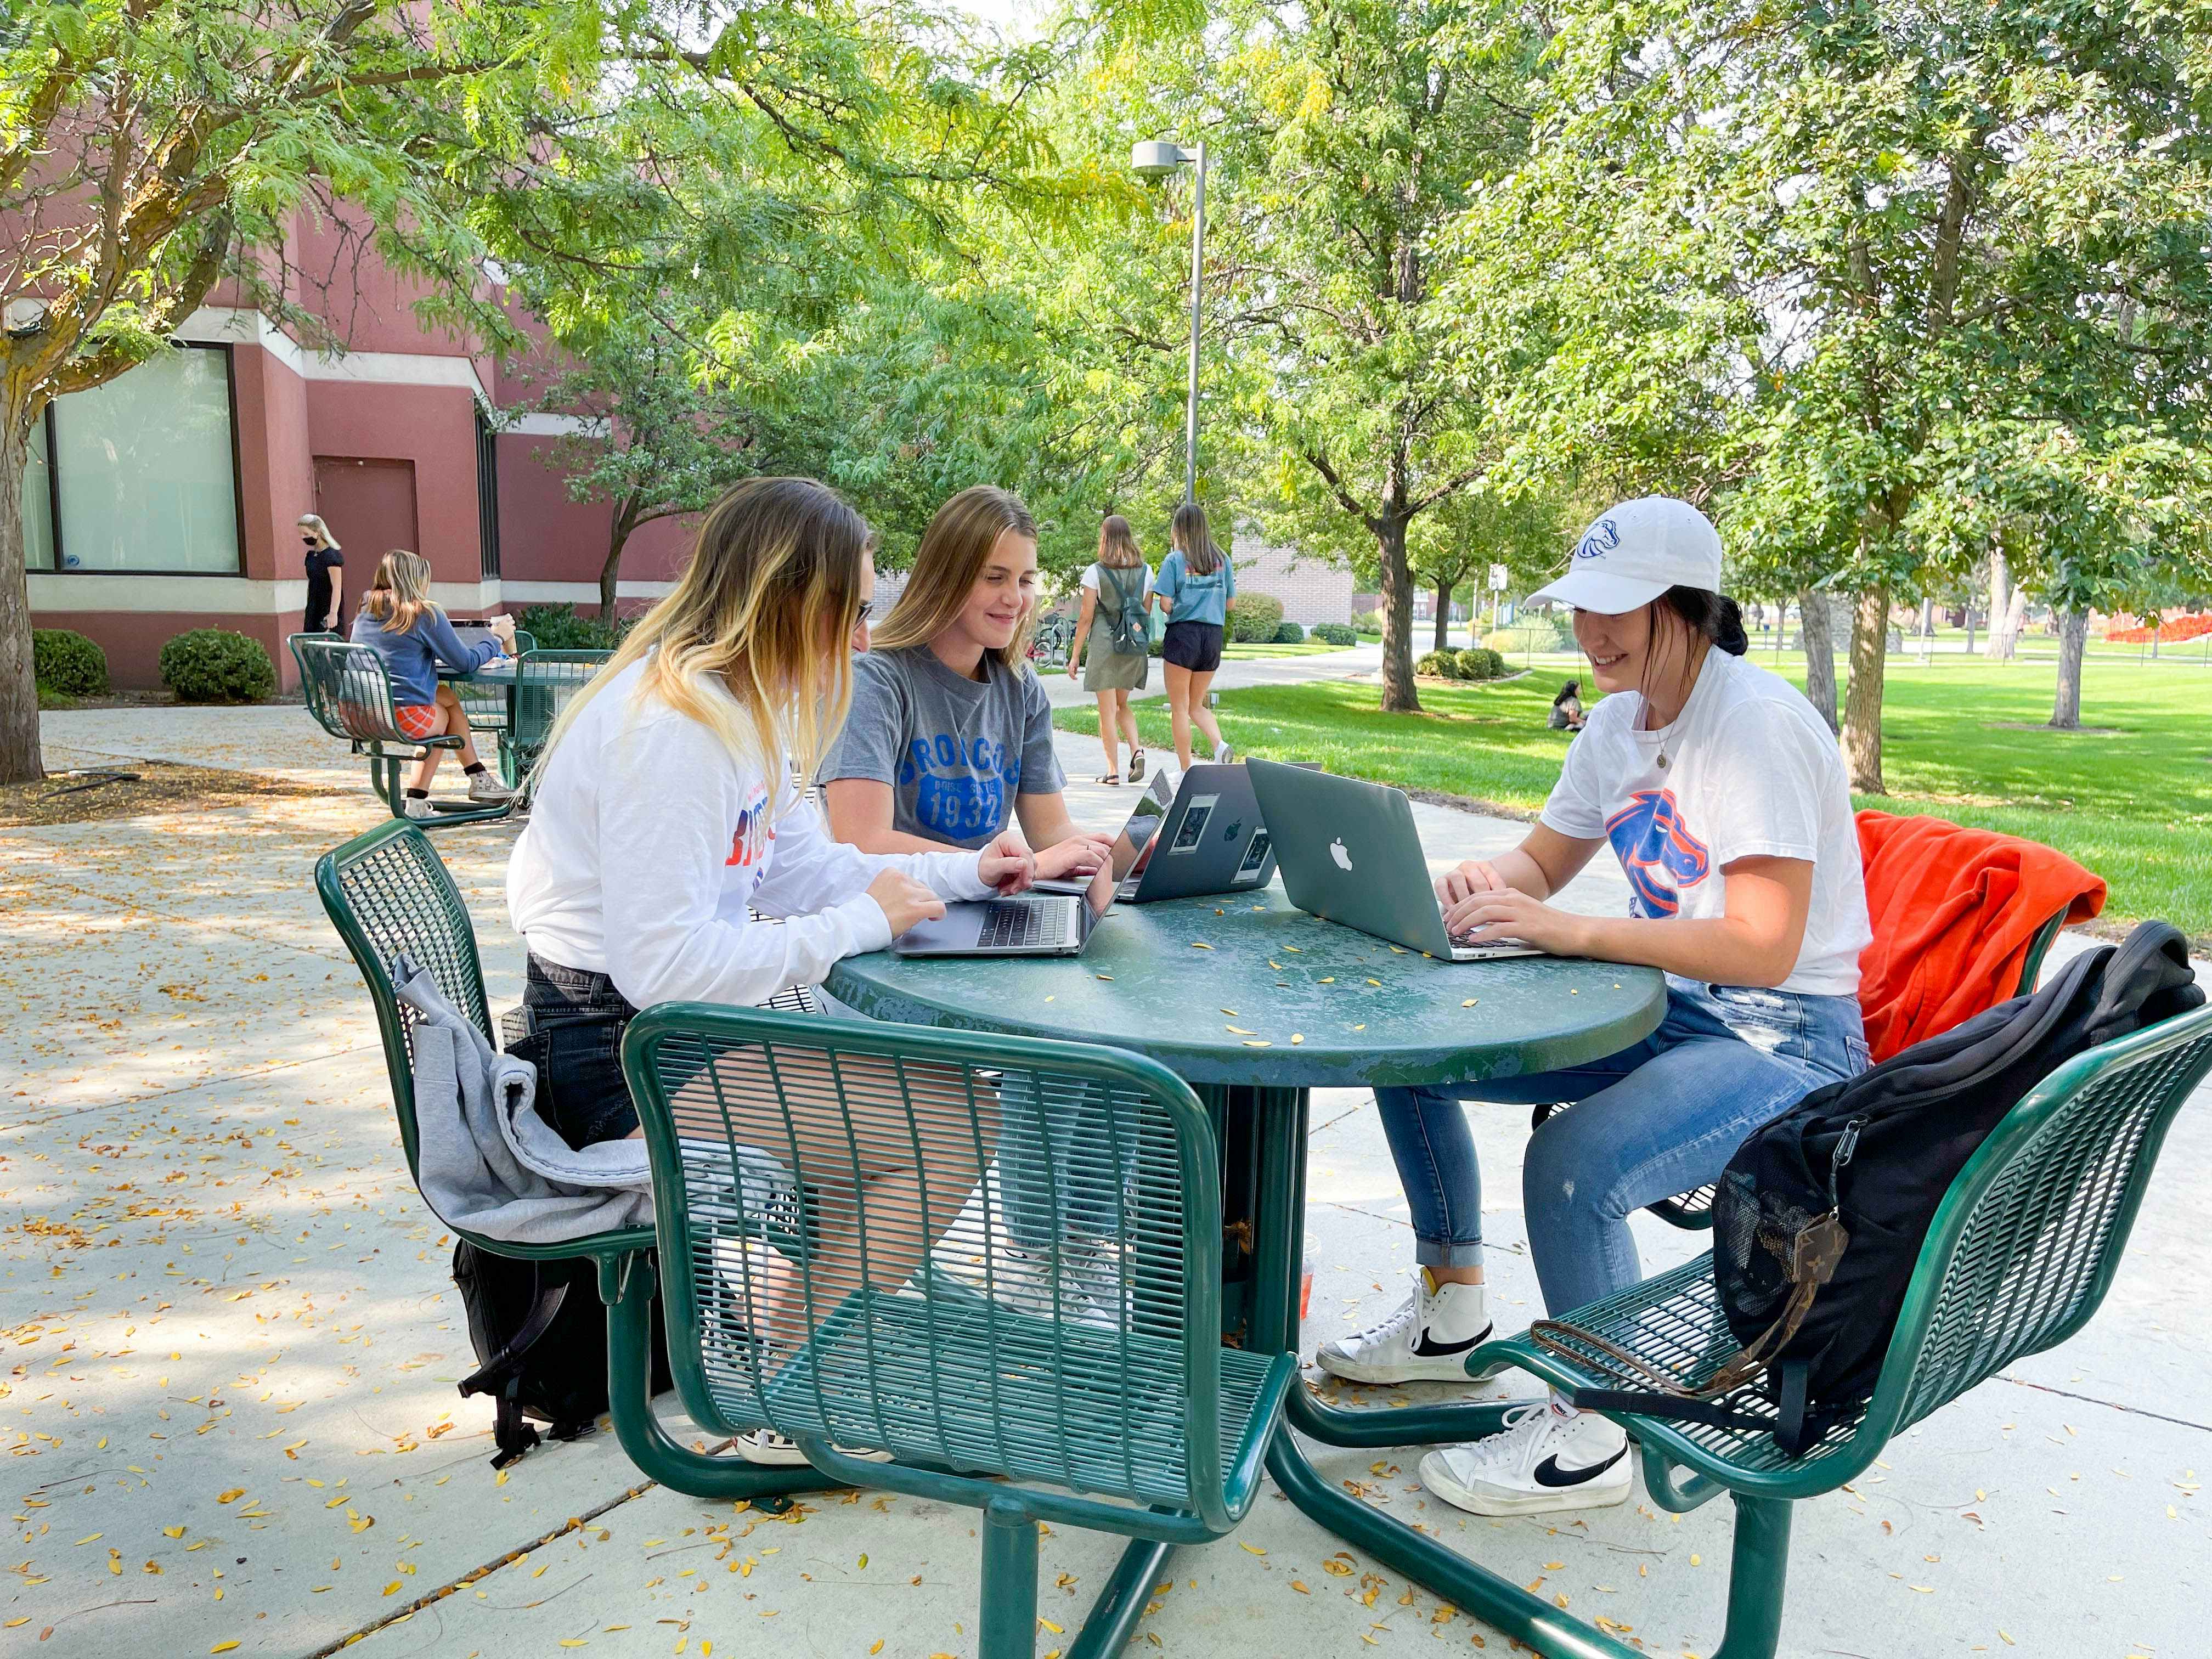 - Three college students are sitting outside at a green table on campus. They are all looking at their laptops and talking.